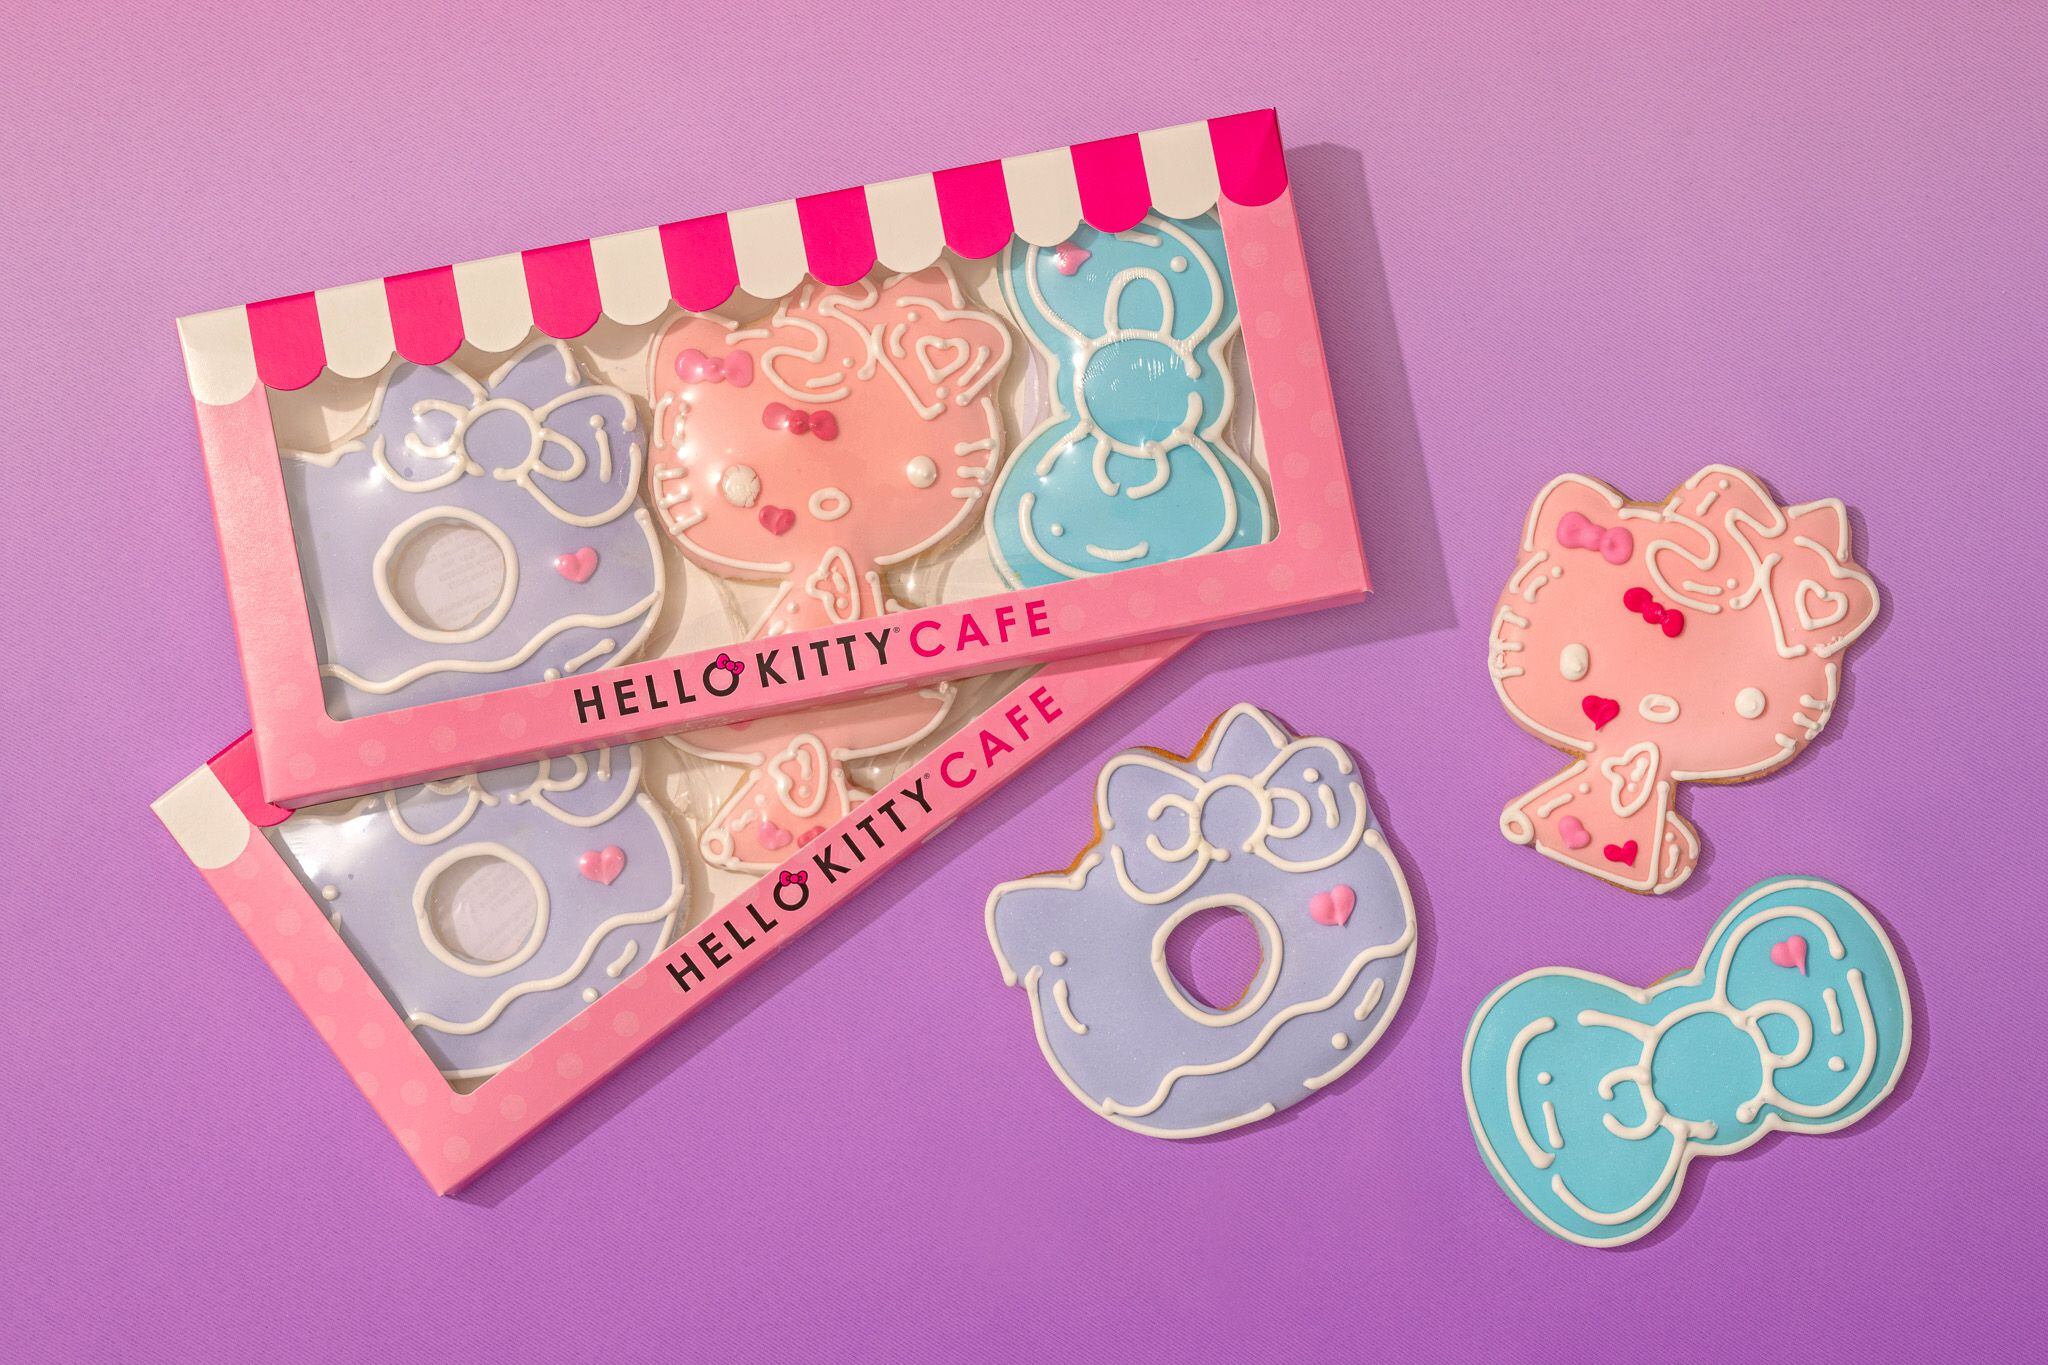 Since 2014, the truck has toured different U.S. cities to allow fans to buy exclusive and limited-edition Hello Kitty-themed treats and merchandise.